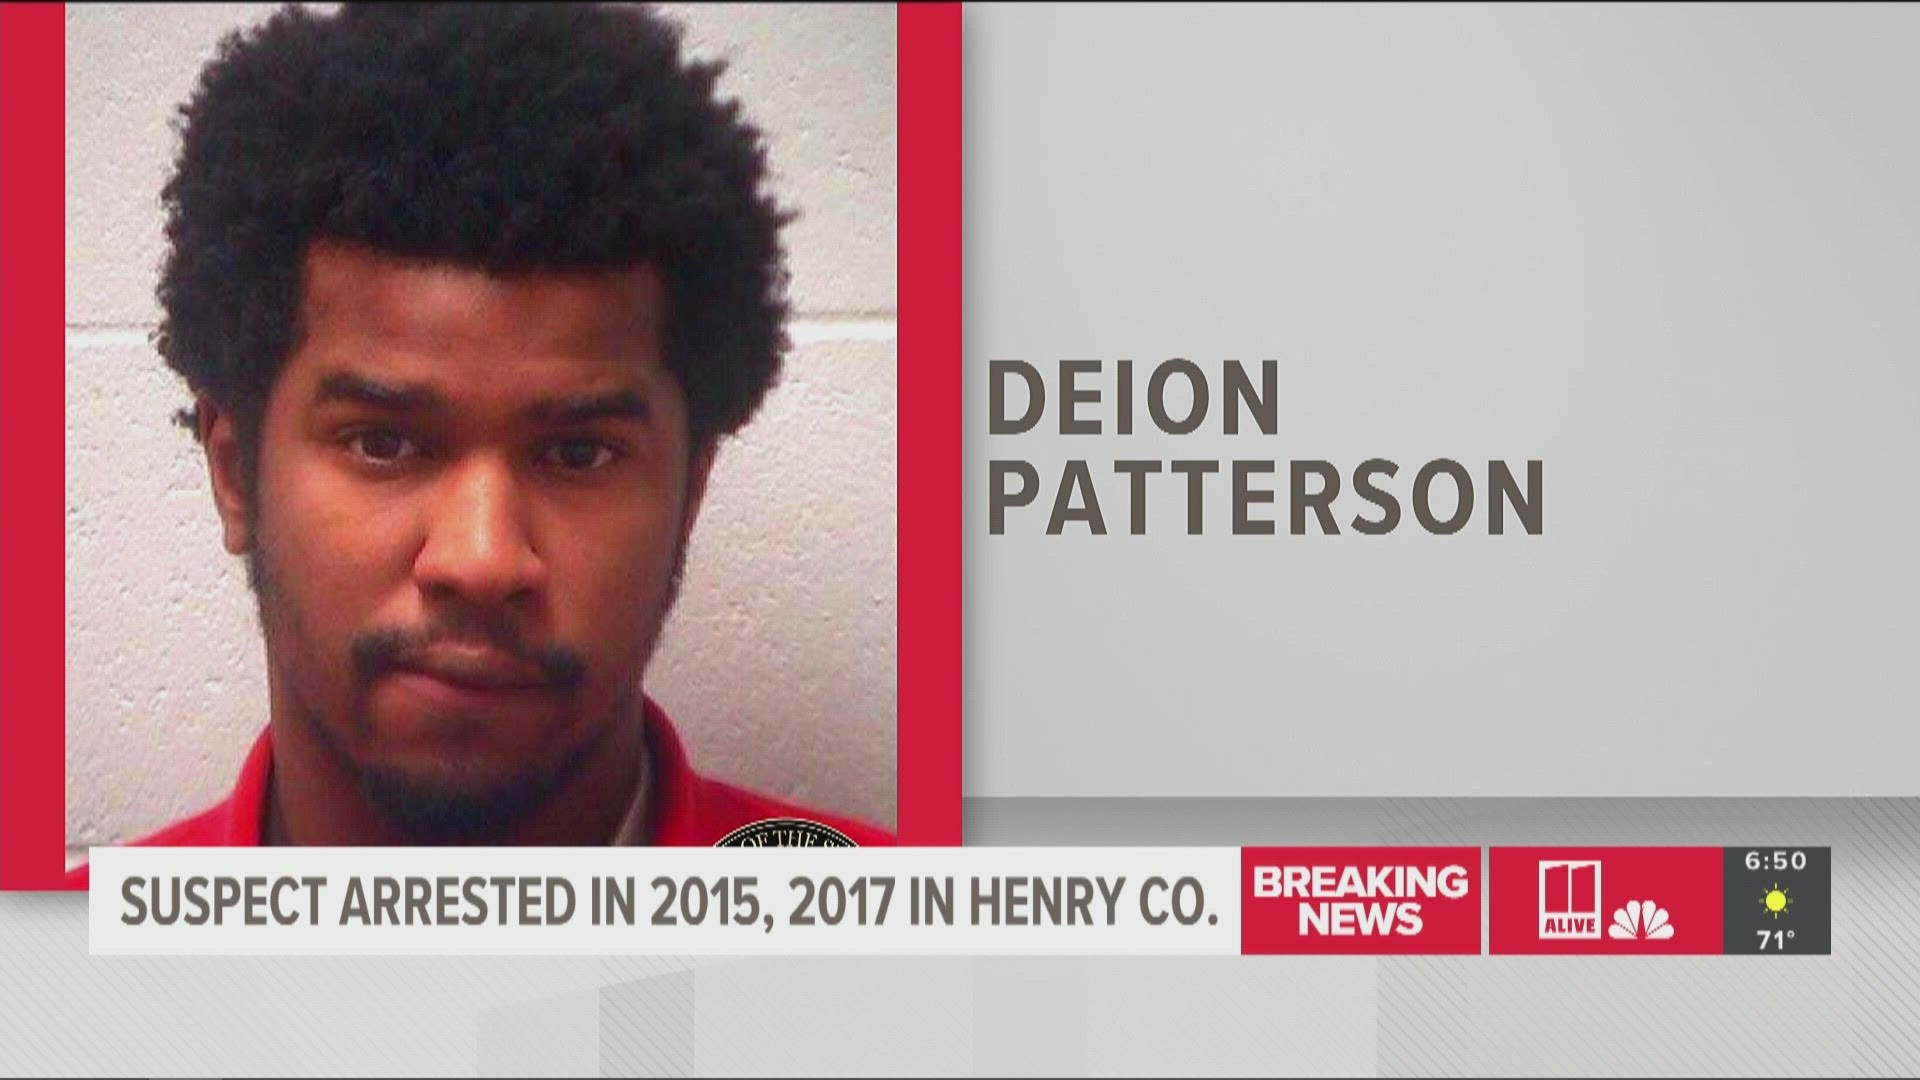 As the search continues for Deion Patterson, here's what we have learned about his past criminal history.